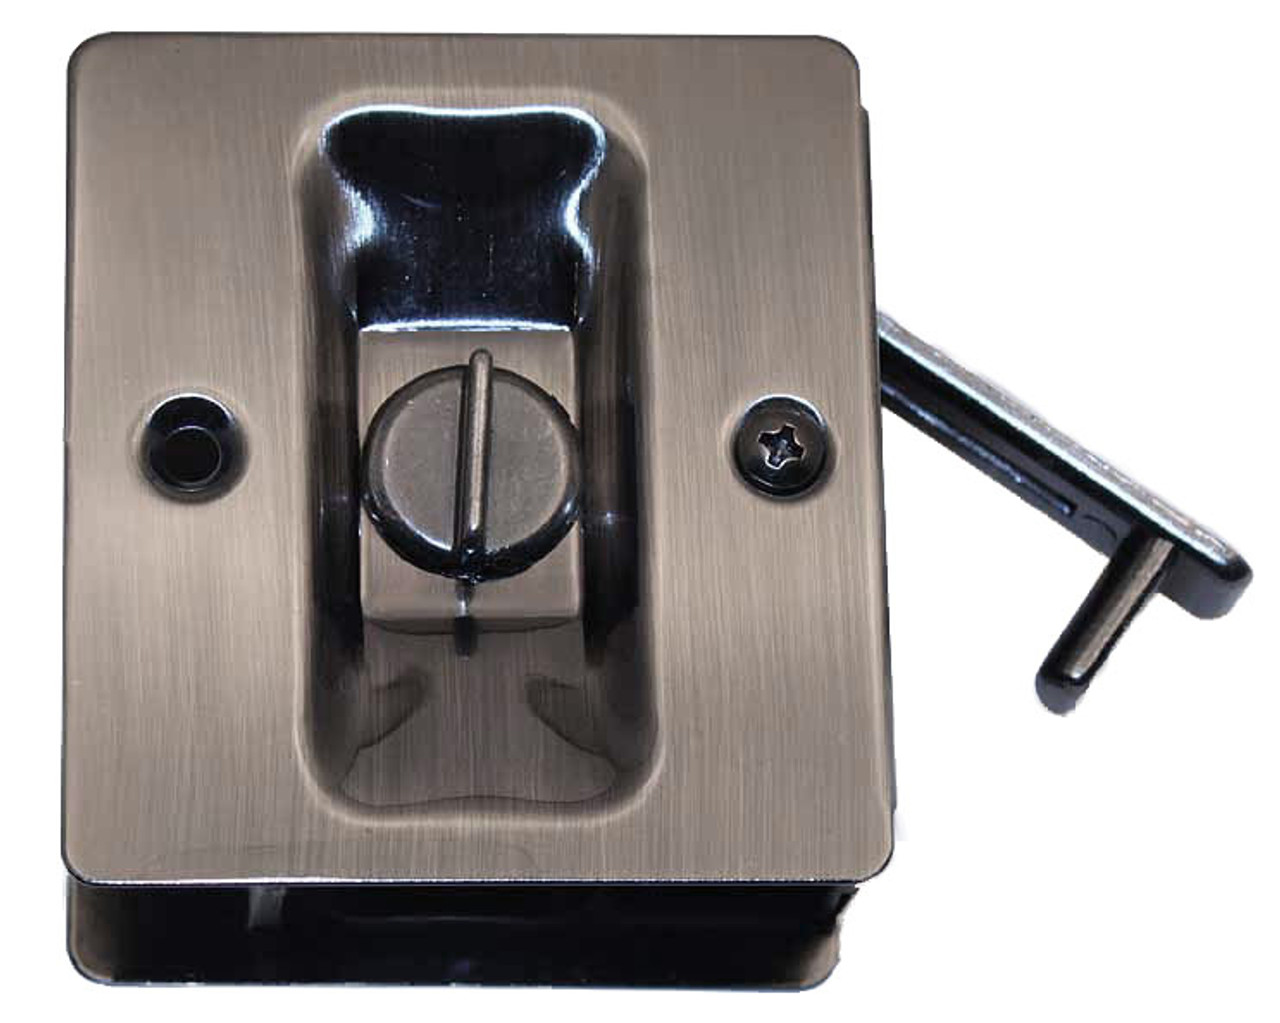 Small Nickel-Plated Square Working Padlock